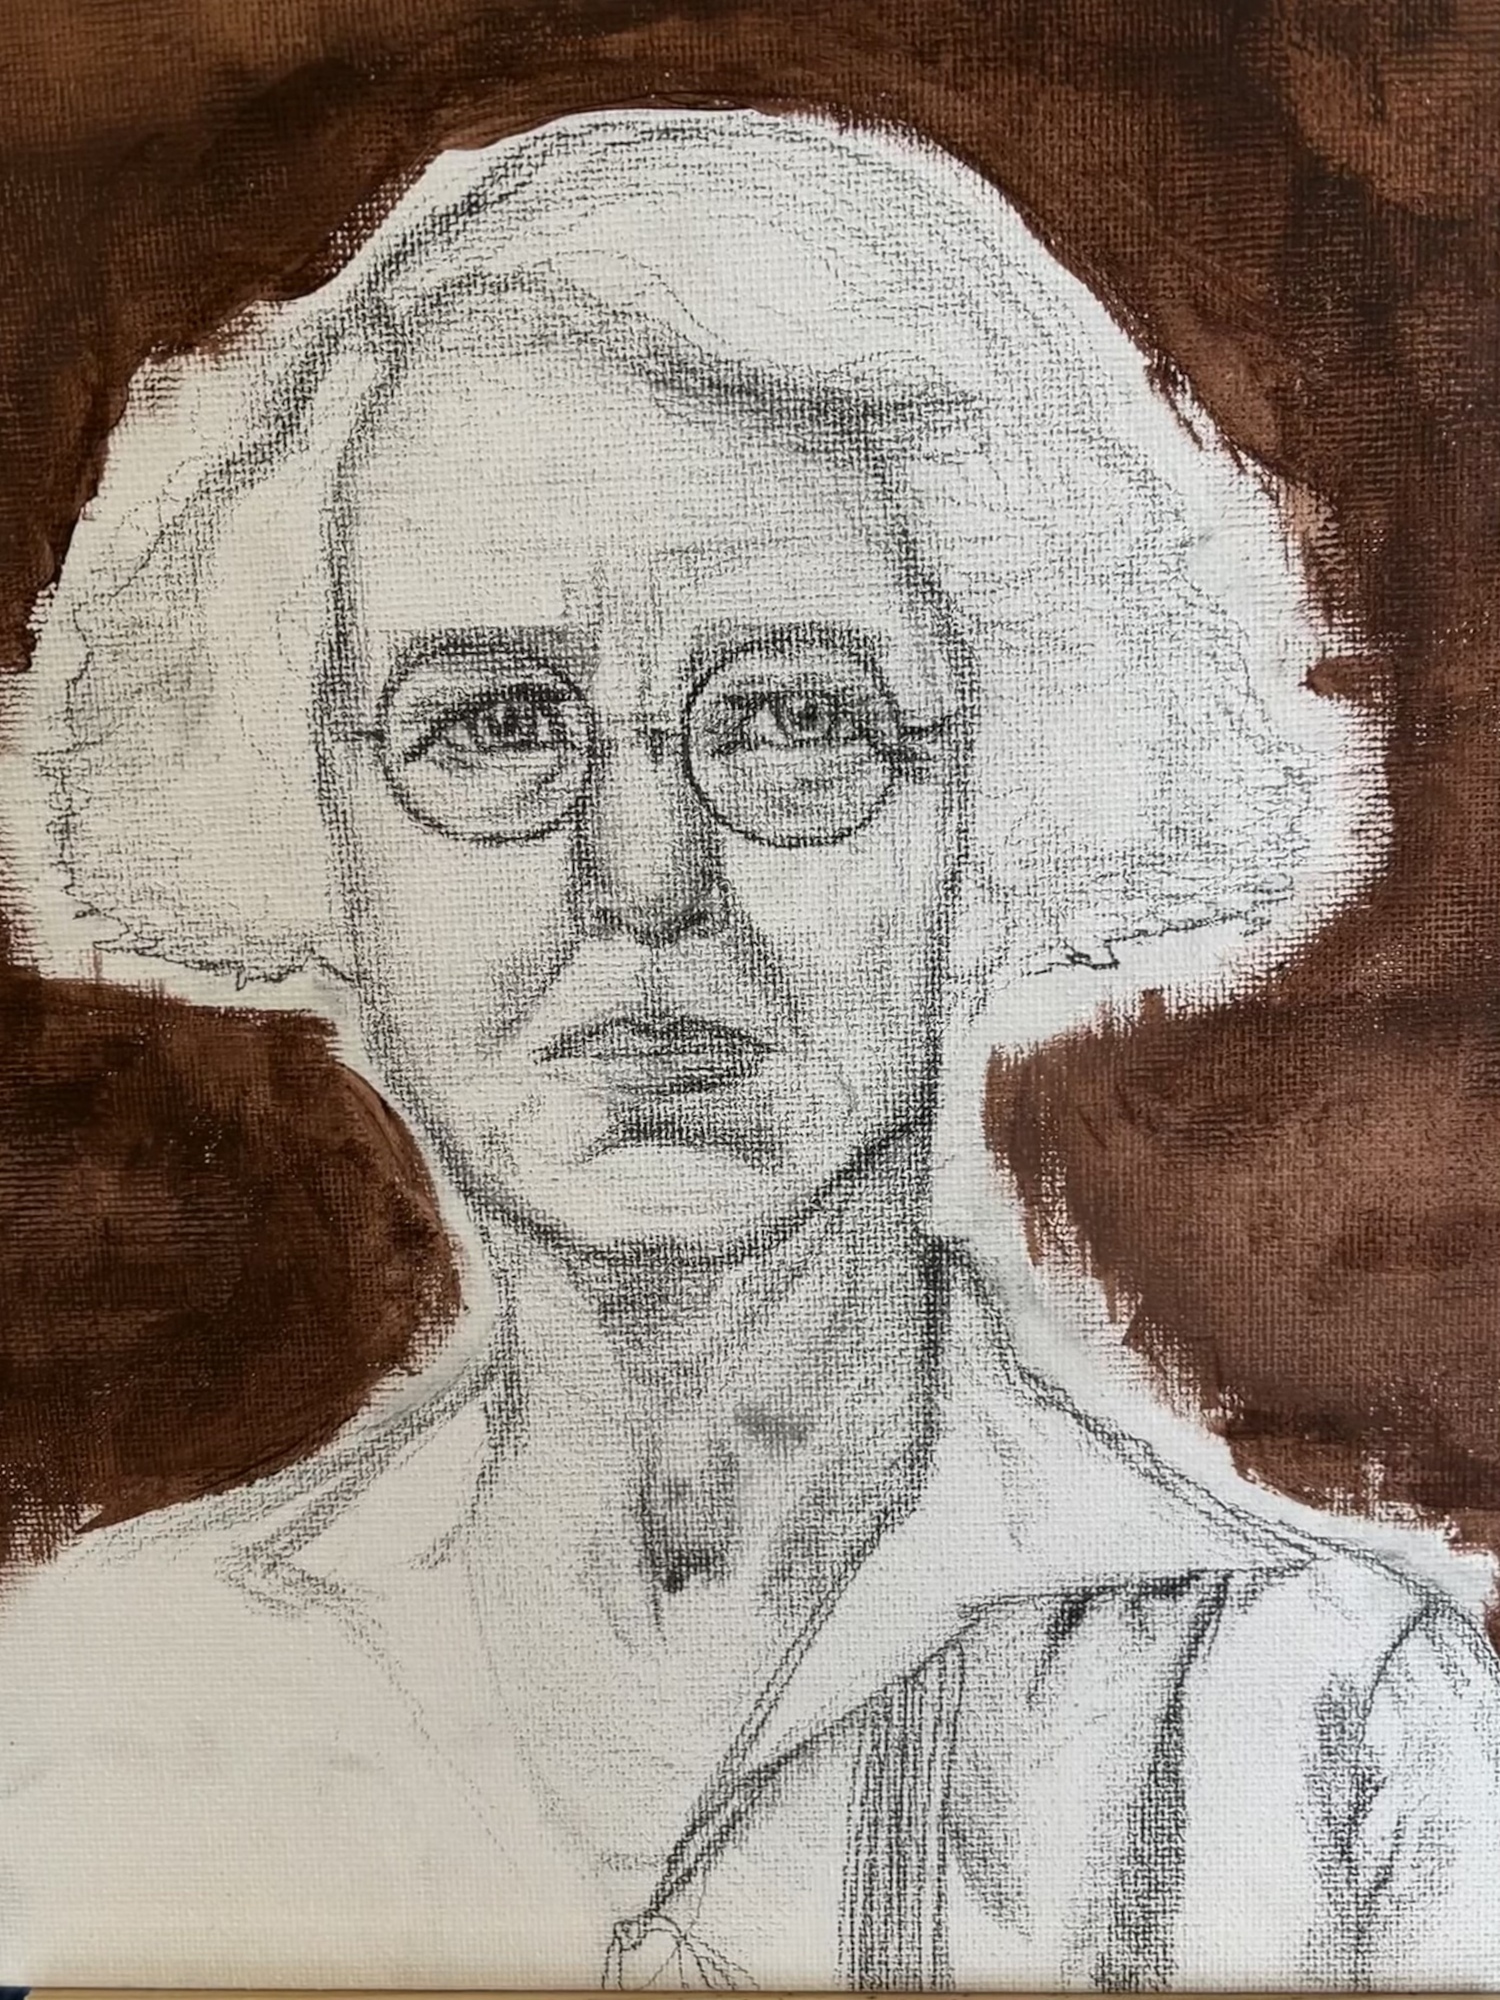 Drawing on pencil of woman with short curly hair, glasses, and not smiling. The background is brown painting.